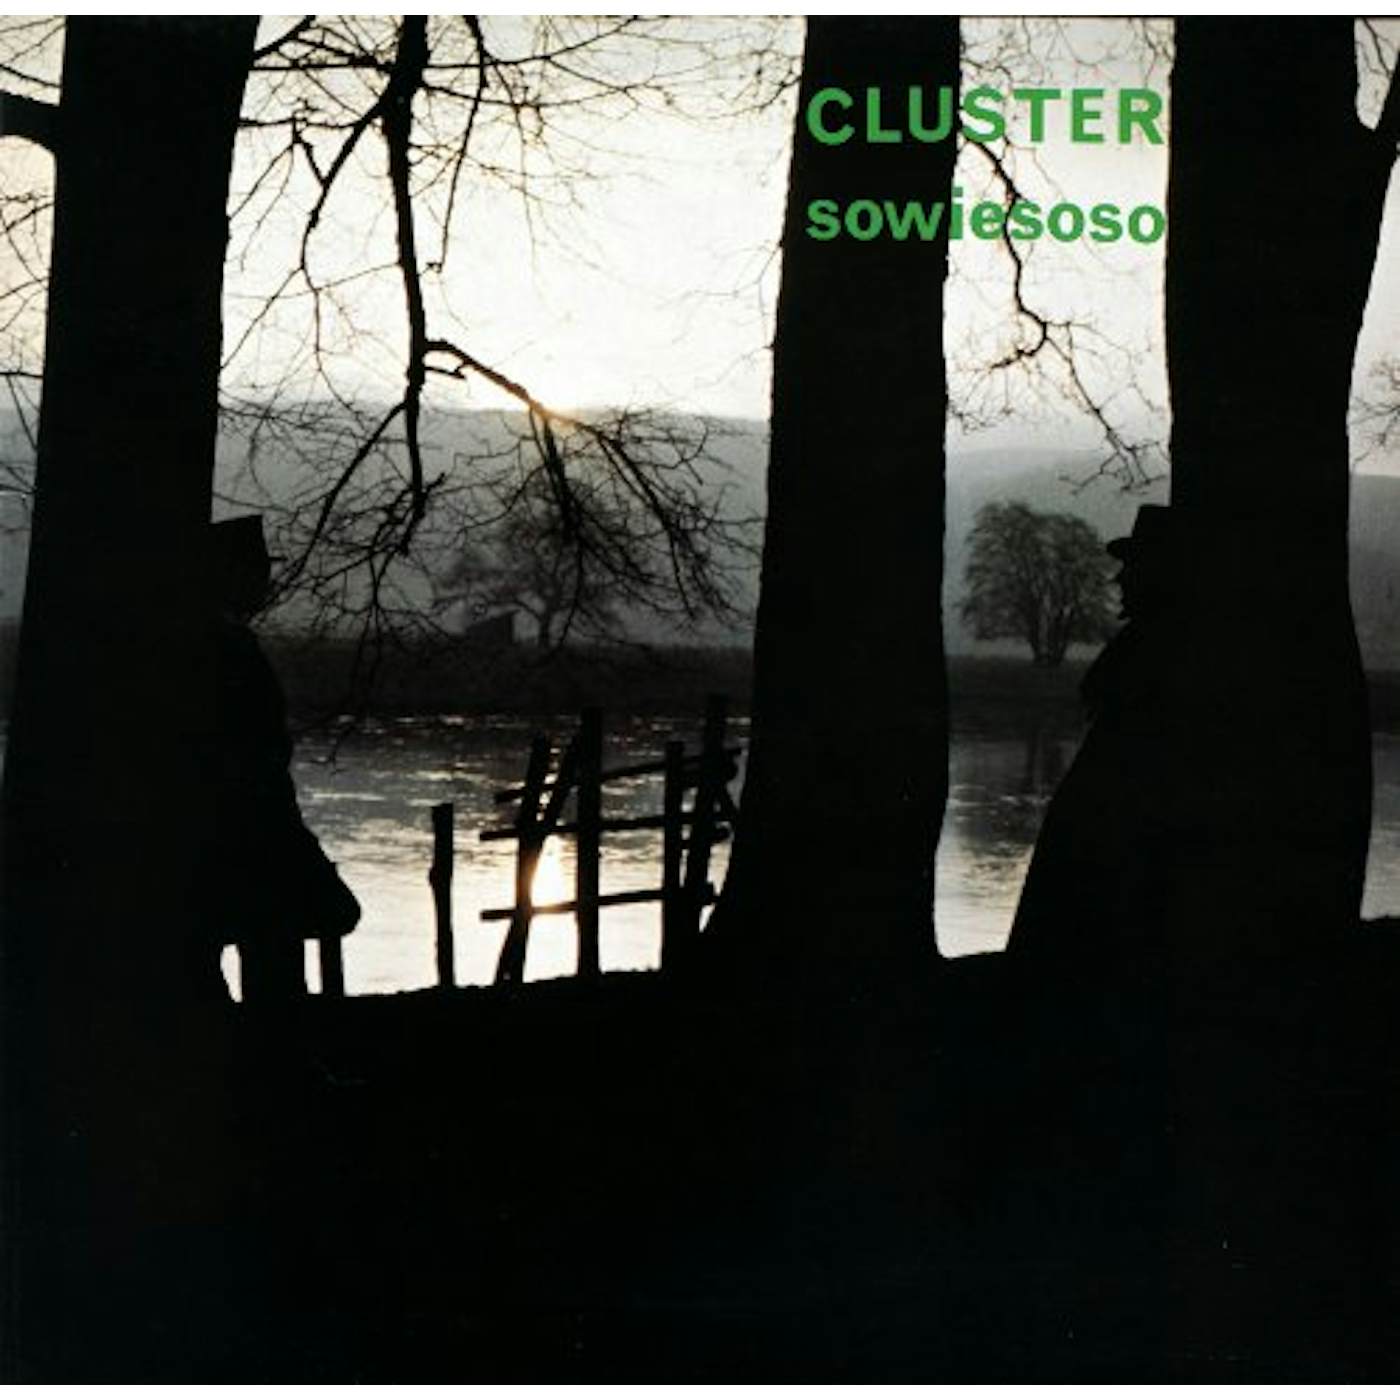 Cluster SOWIESOSO CD